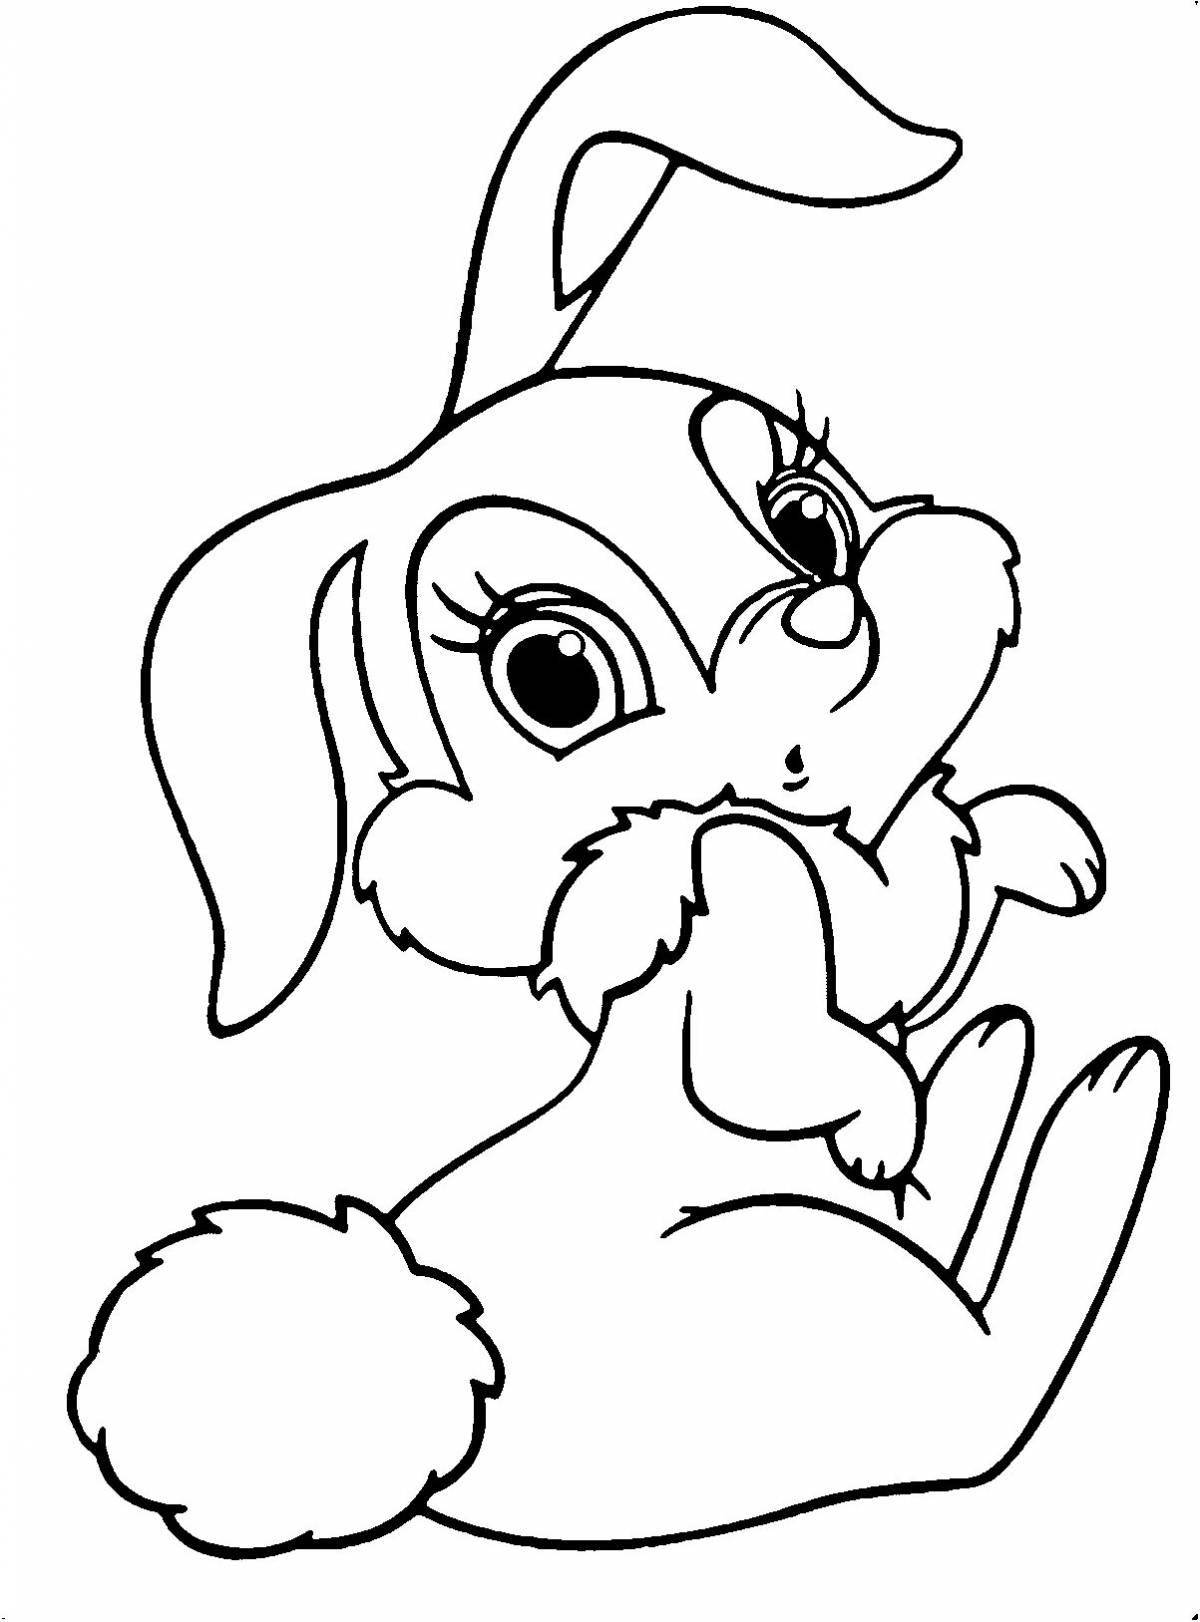 Wiggly dog ​​with heart coloring page